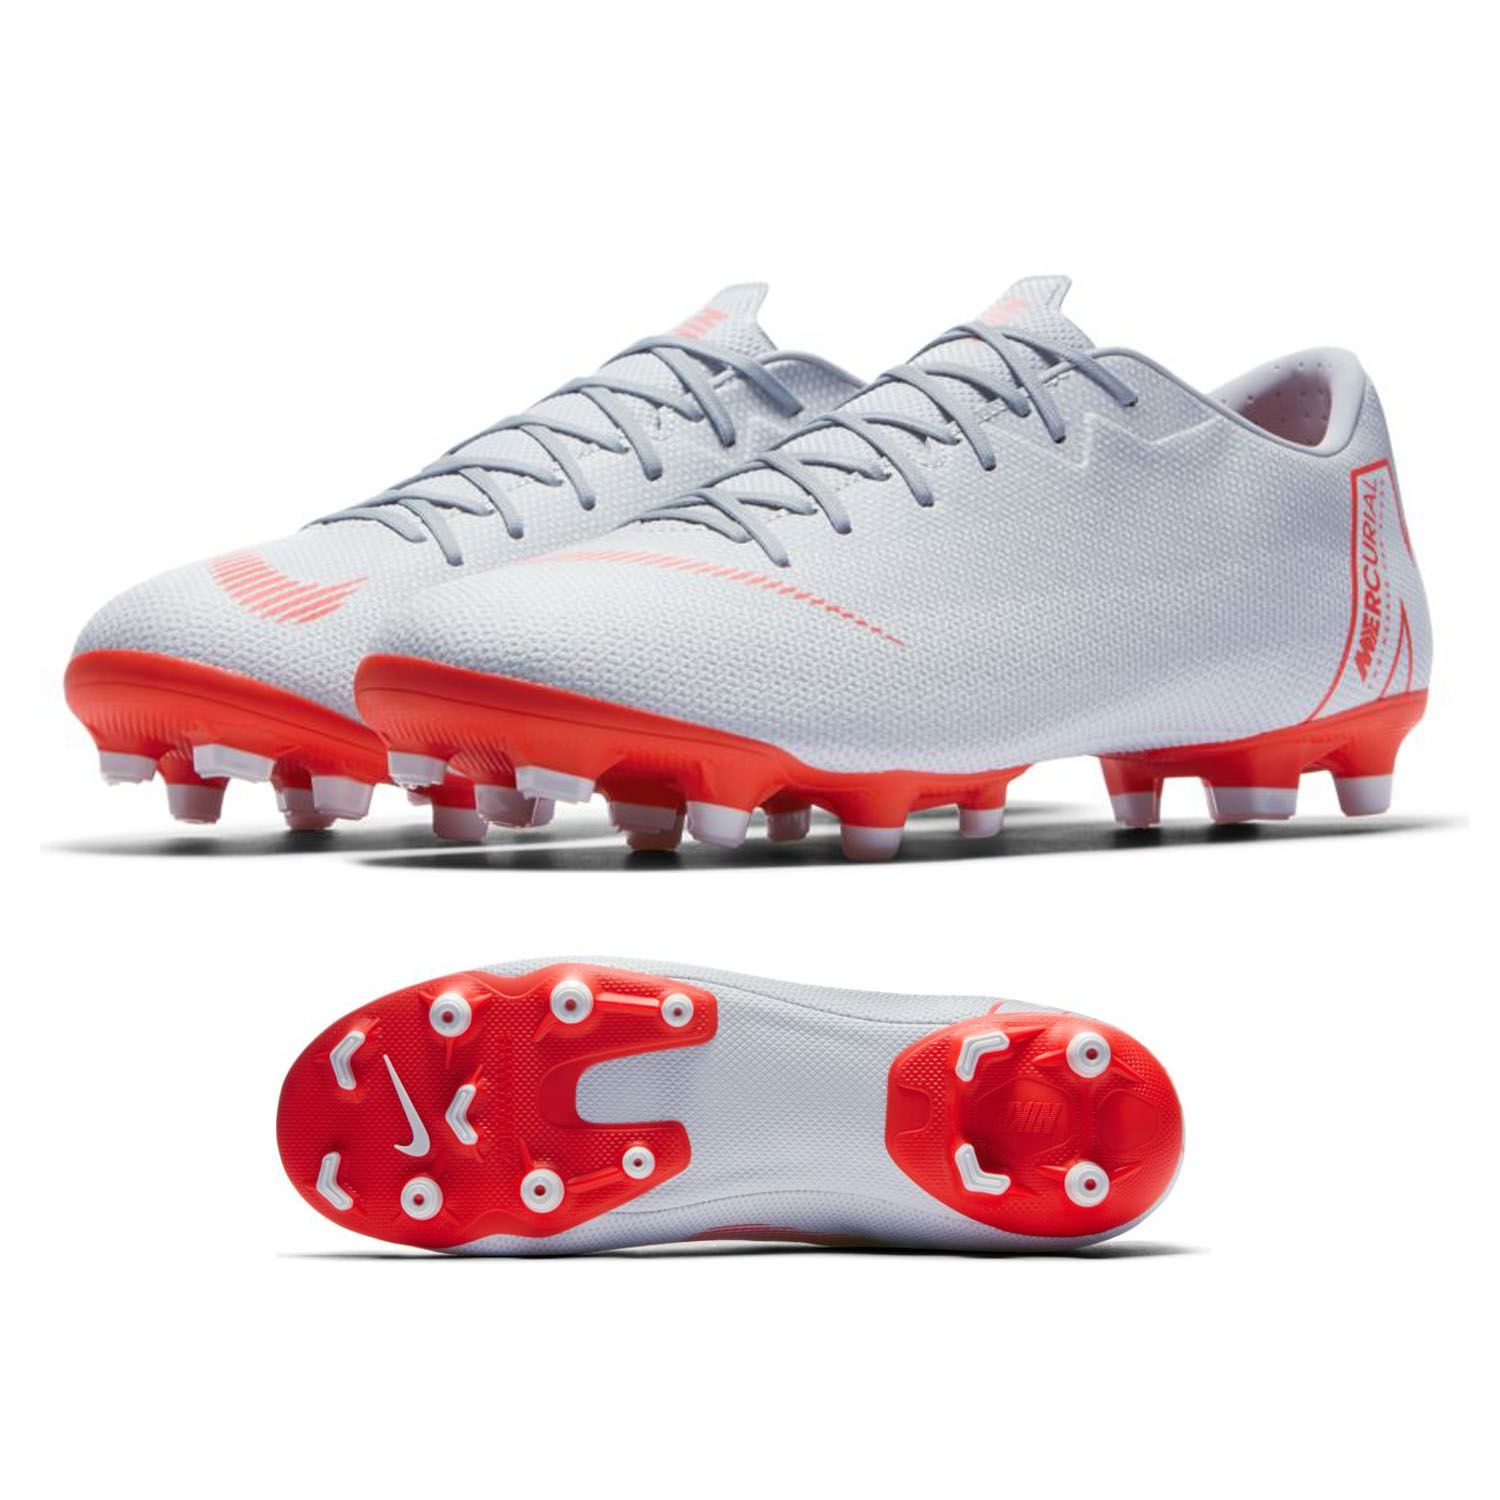 youth football cleats at academy